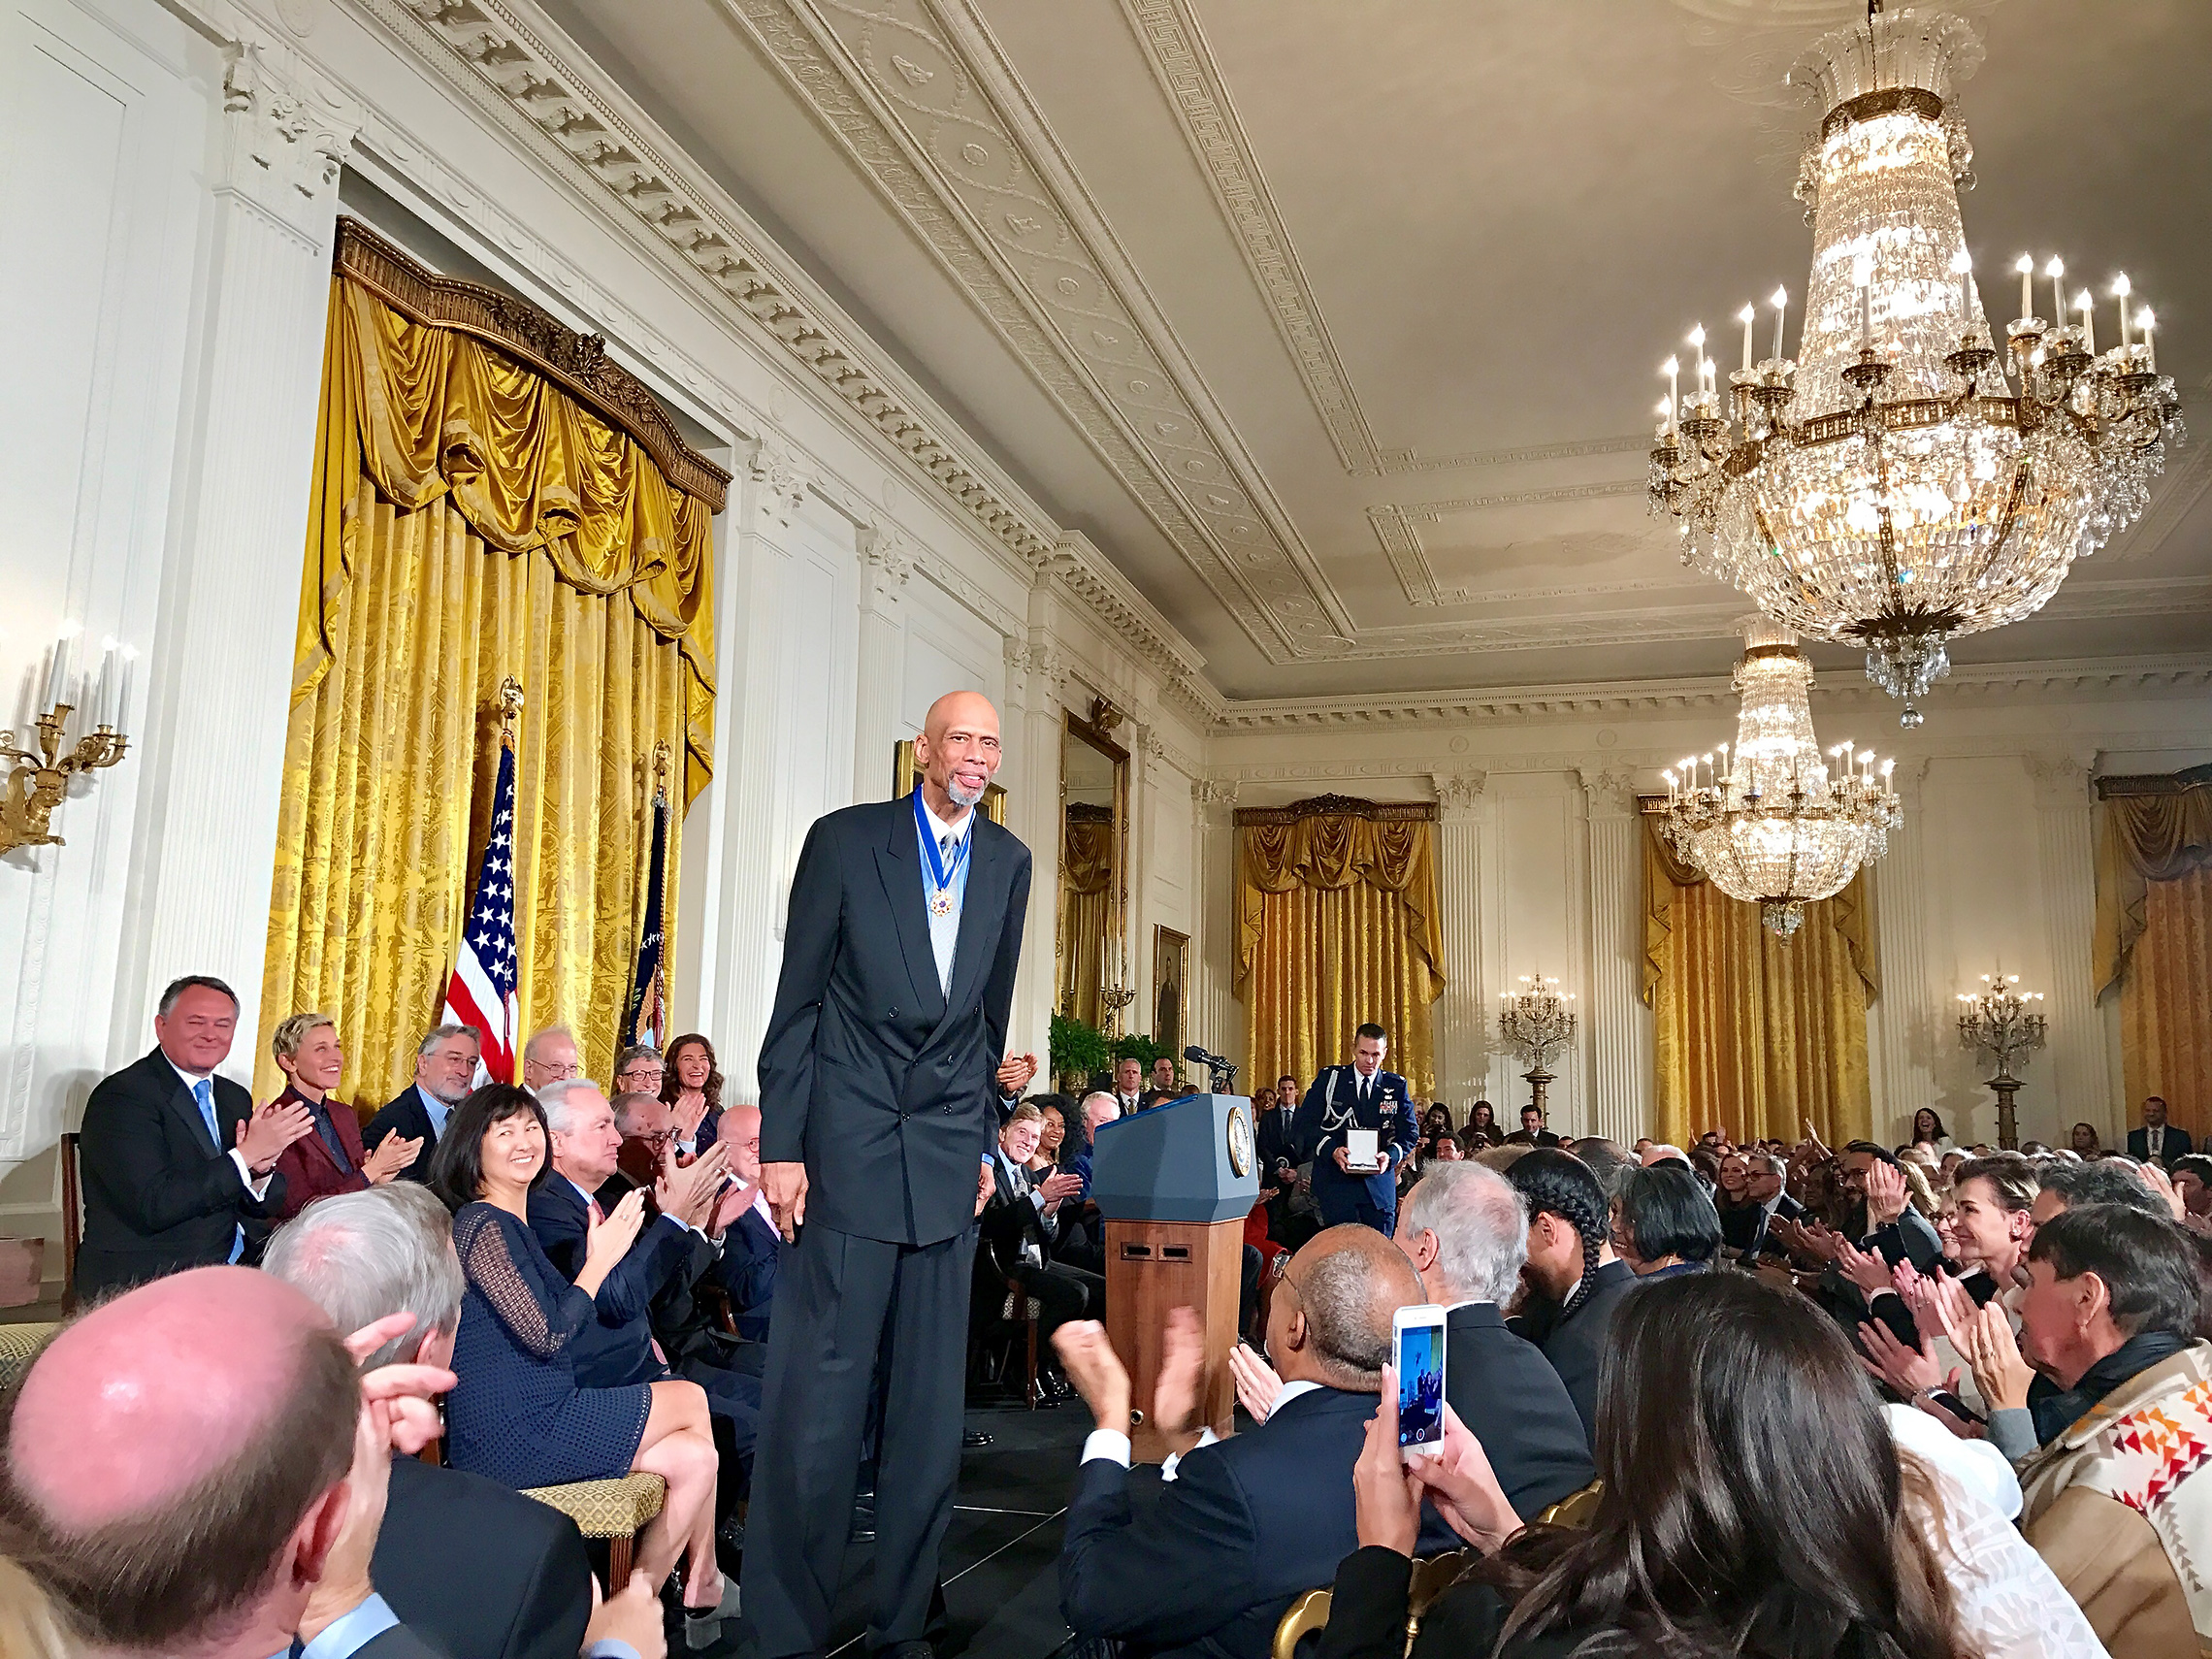 November 22, 2016: President Barack Obama awards Kareem Abdul-Jabbar with the Presidential Medal of Freedom during a ceremony in the East Room of the White House in Washington, D.C.